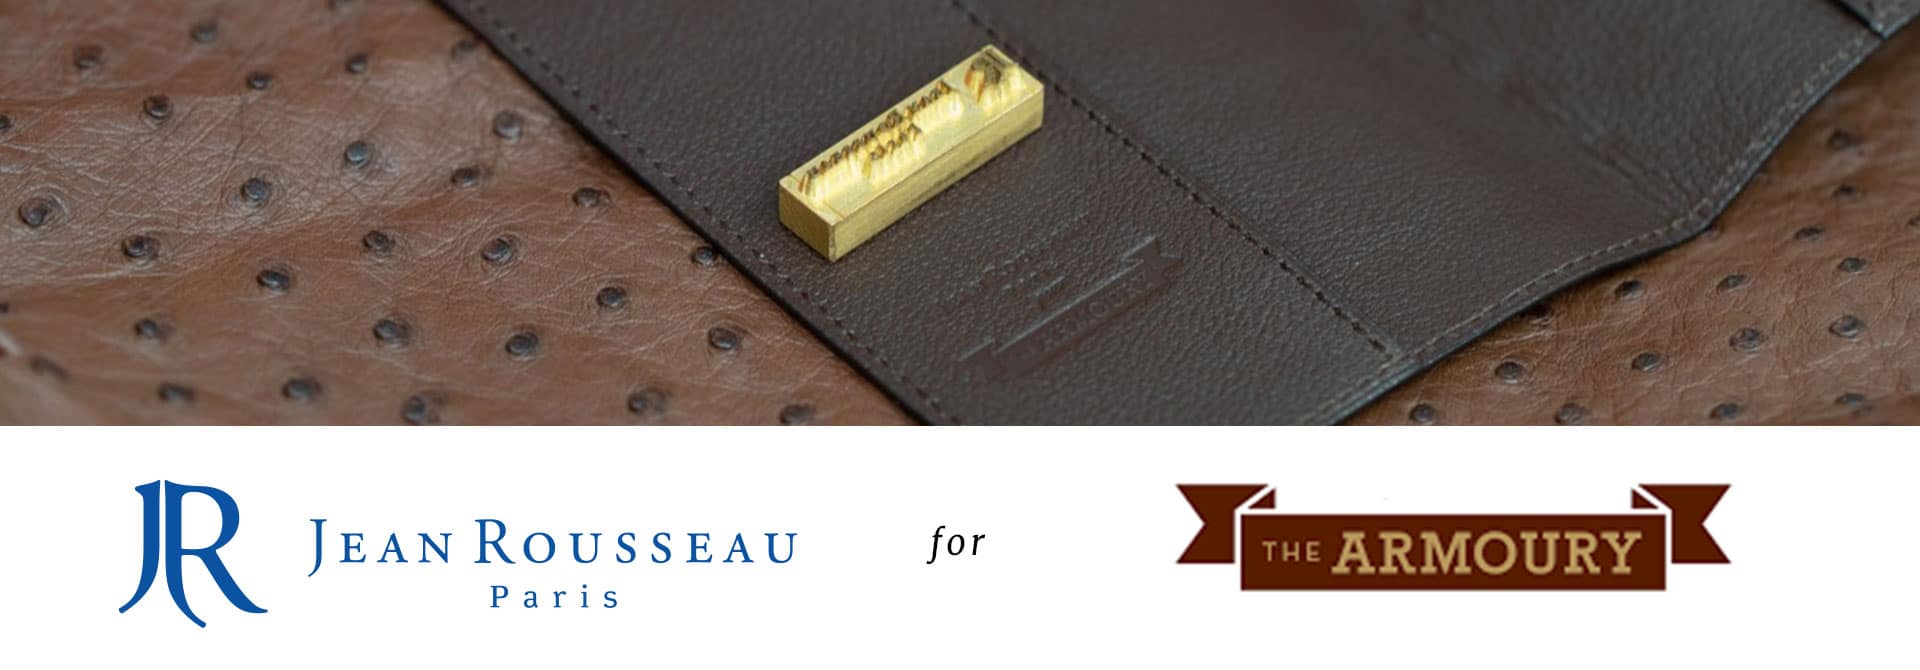 Small Leather Goods - The Armoury